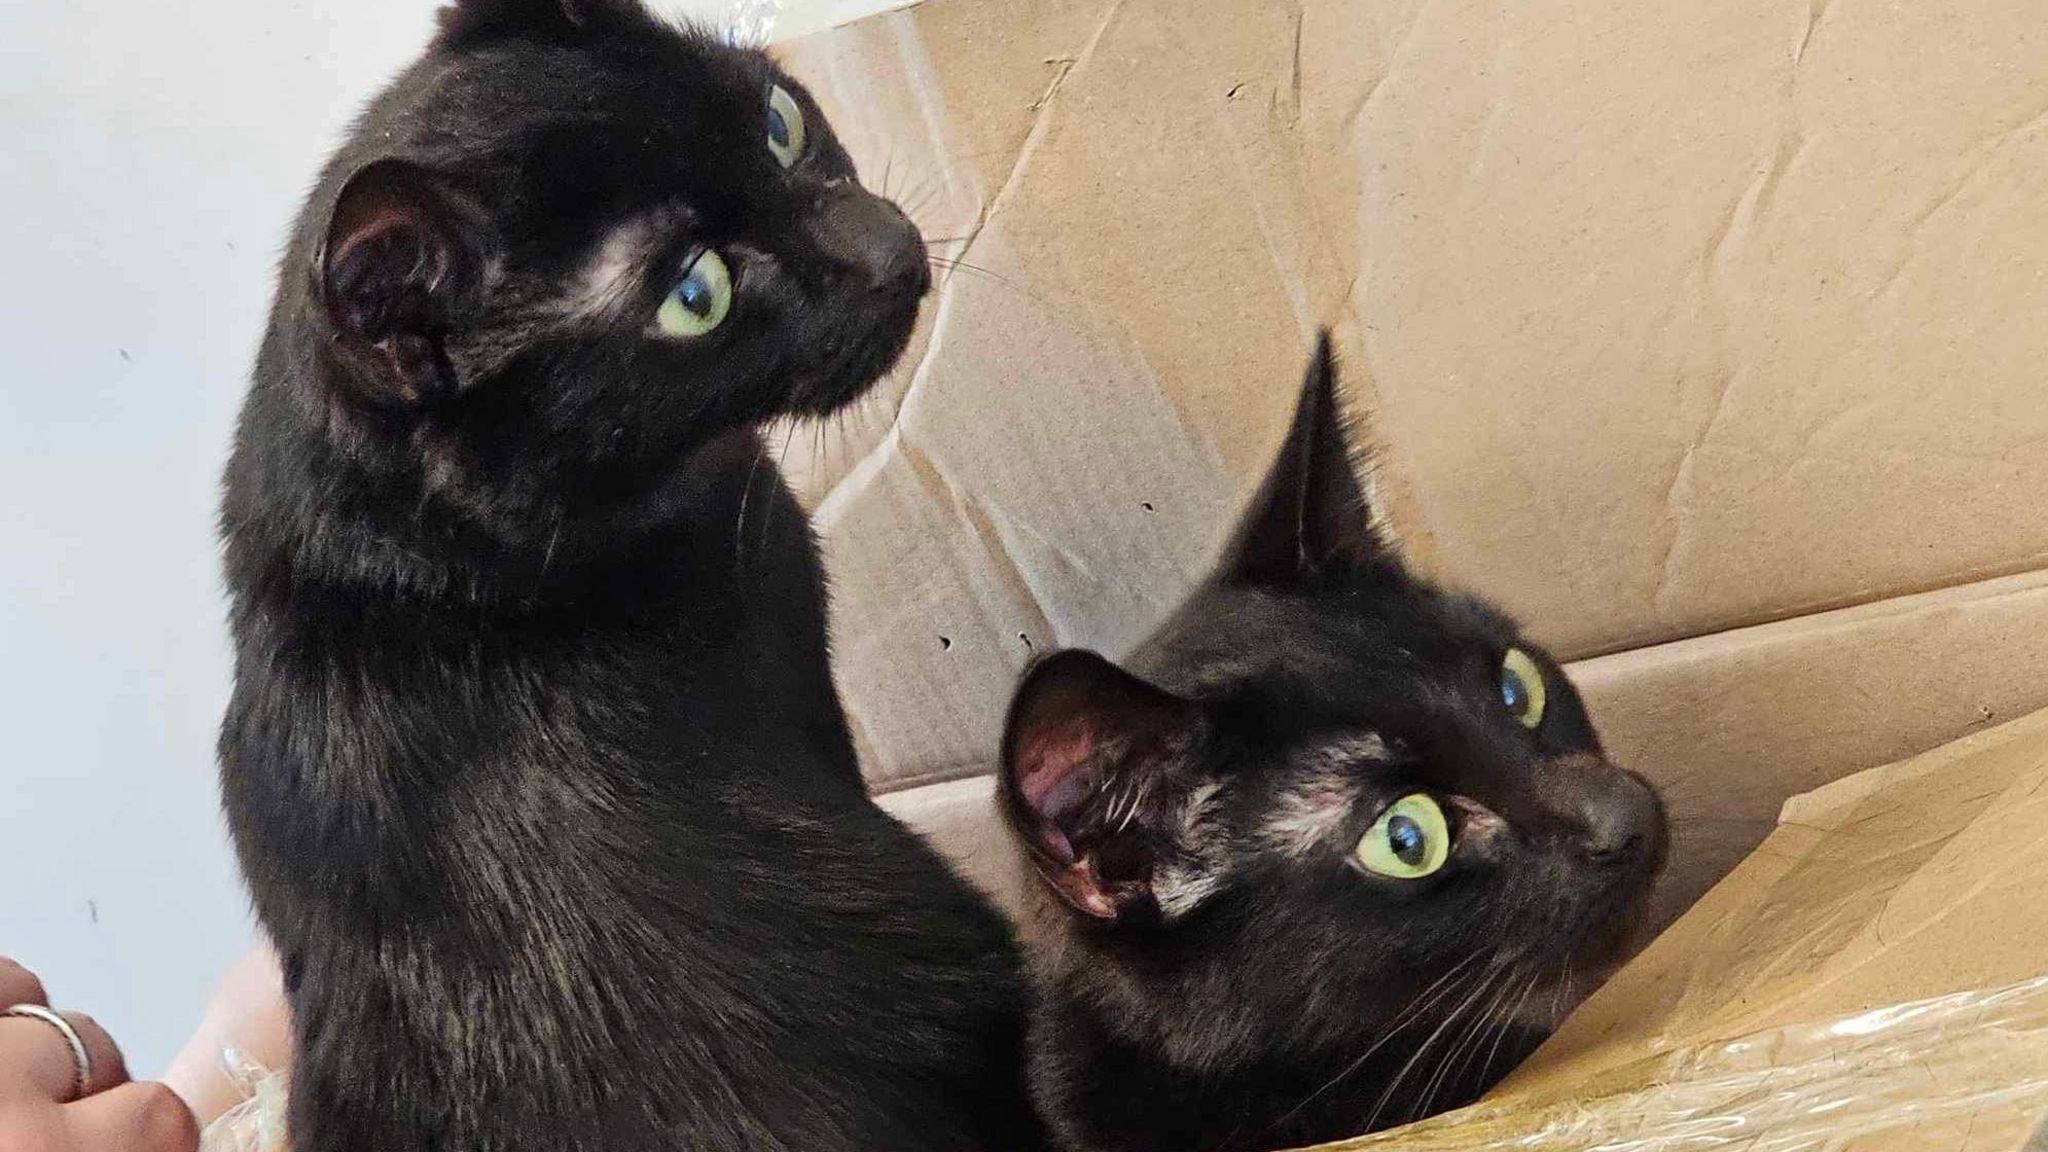 Sealed cardboard box of cats found dumped